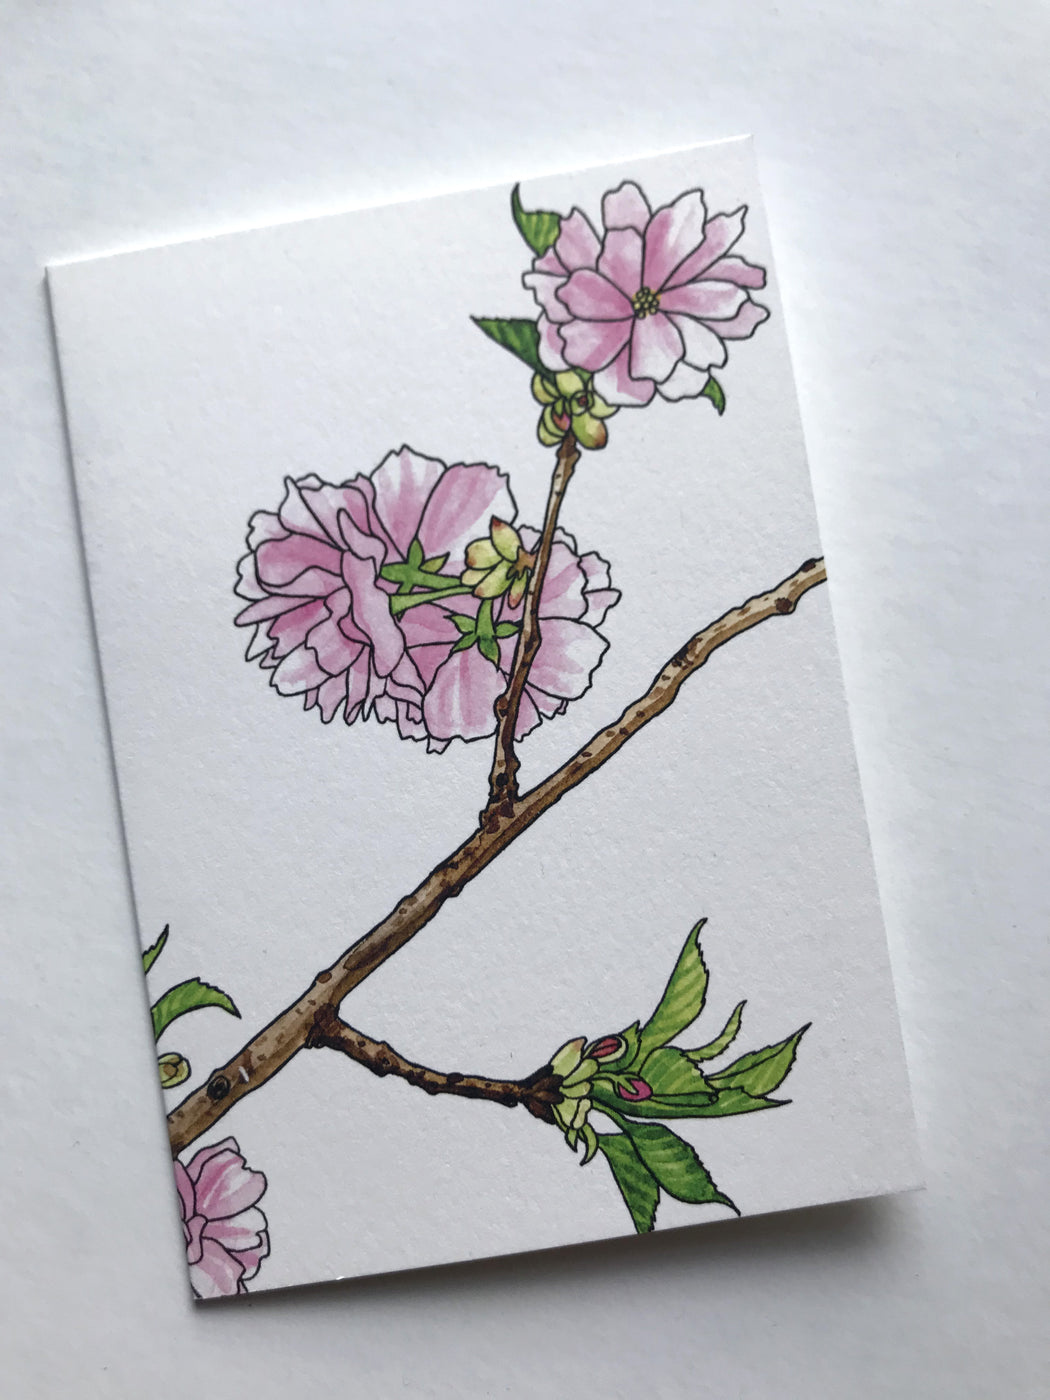 MADE IN USA Sakura (Cherry Blossom) Note Cards by Kate T. Williamson